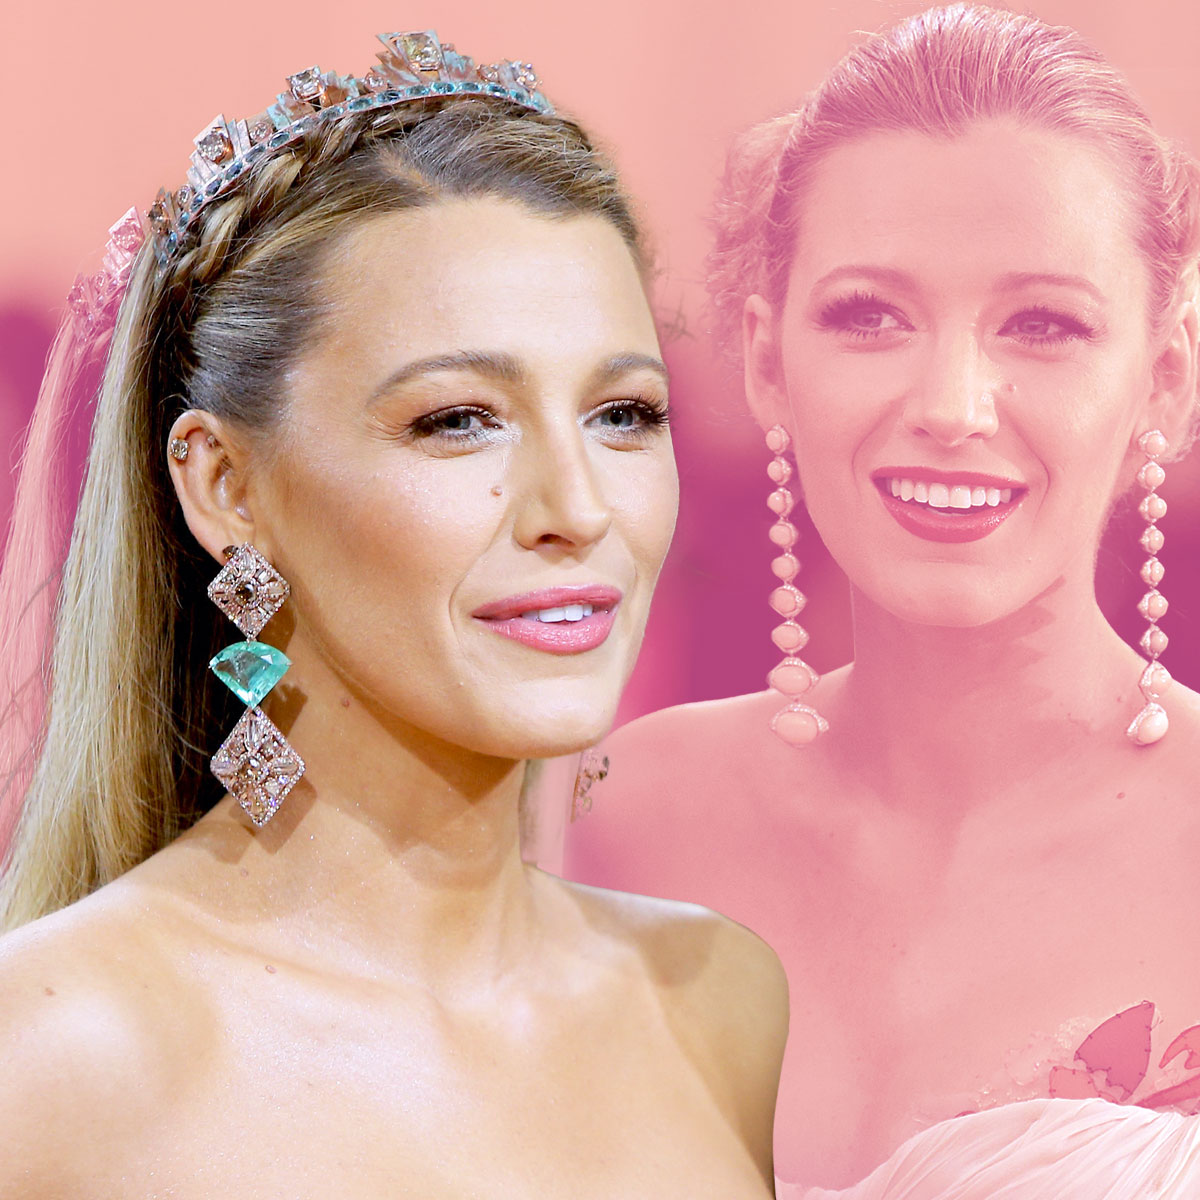 Blake Lively Elevates White Dress with Louboutins for Taylor